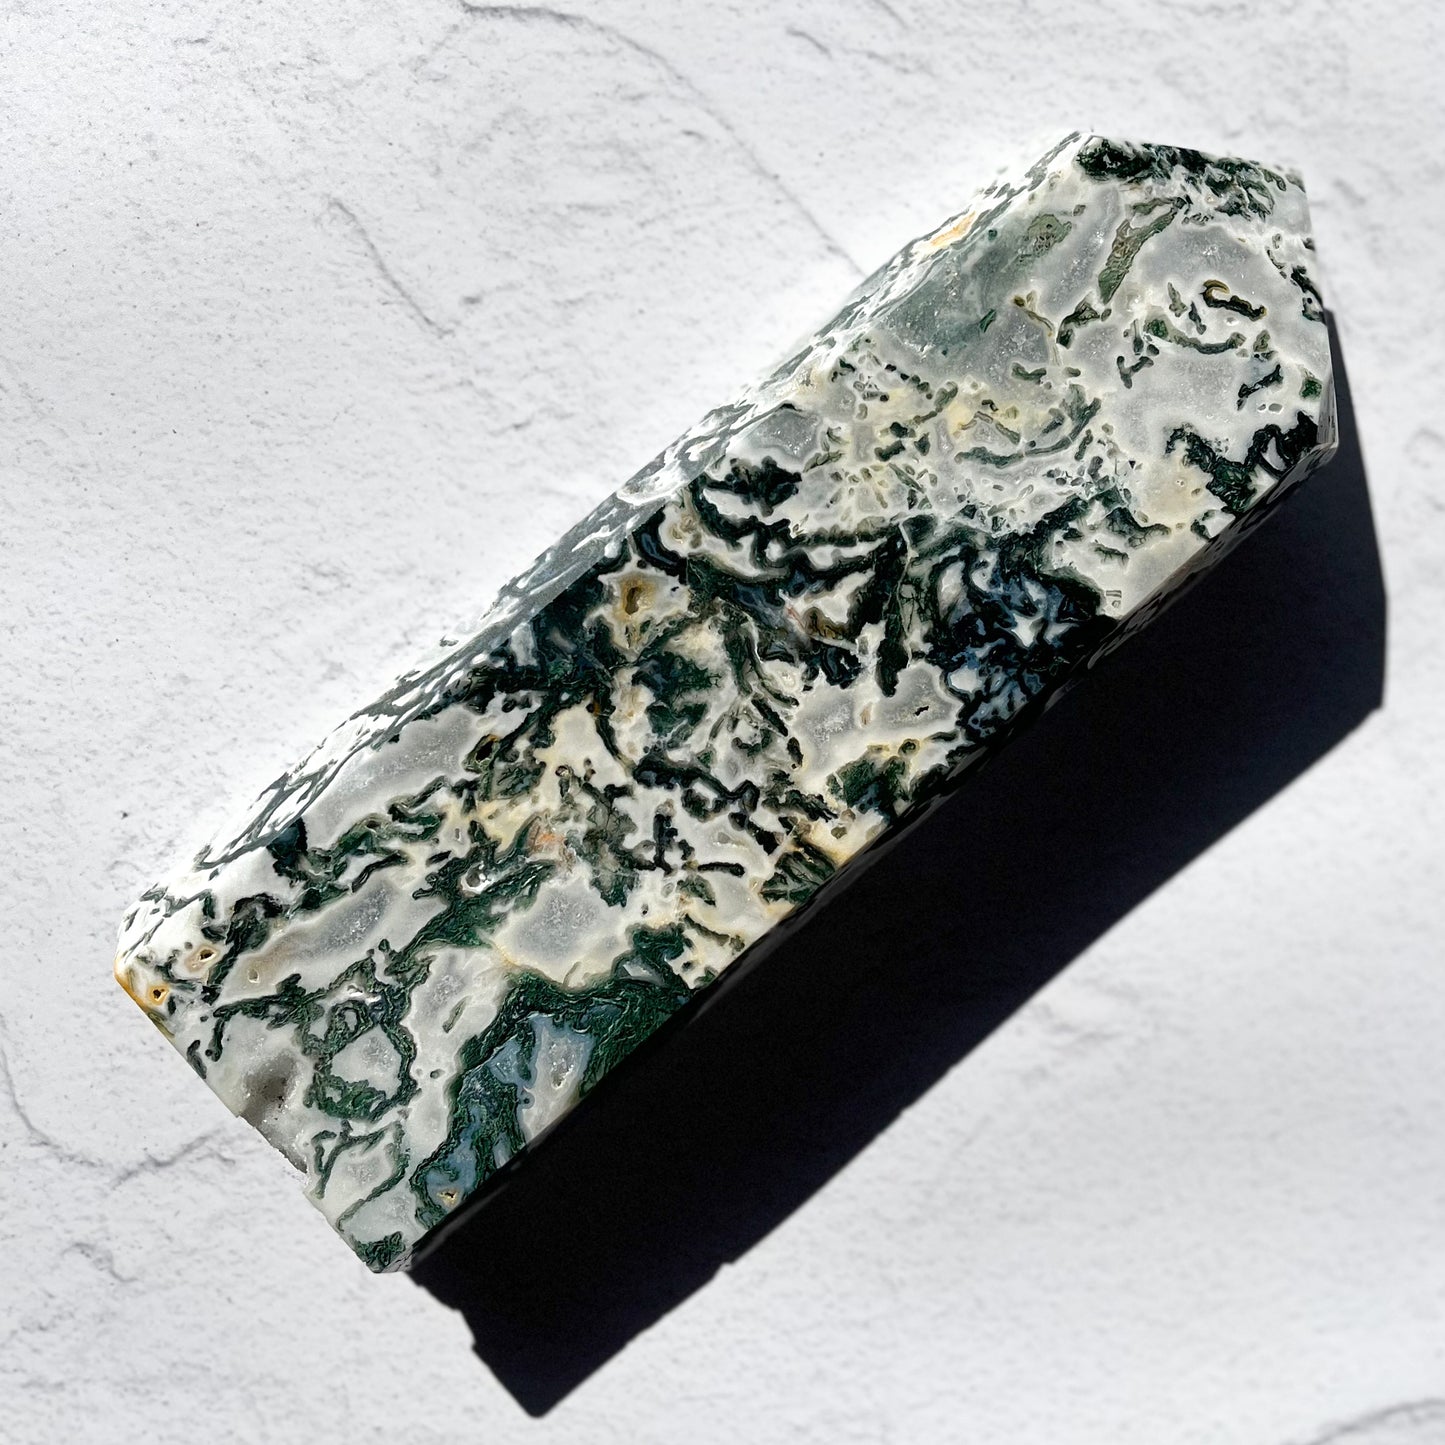 Moss Agate Tower / 2.061kg